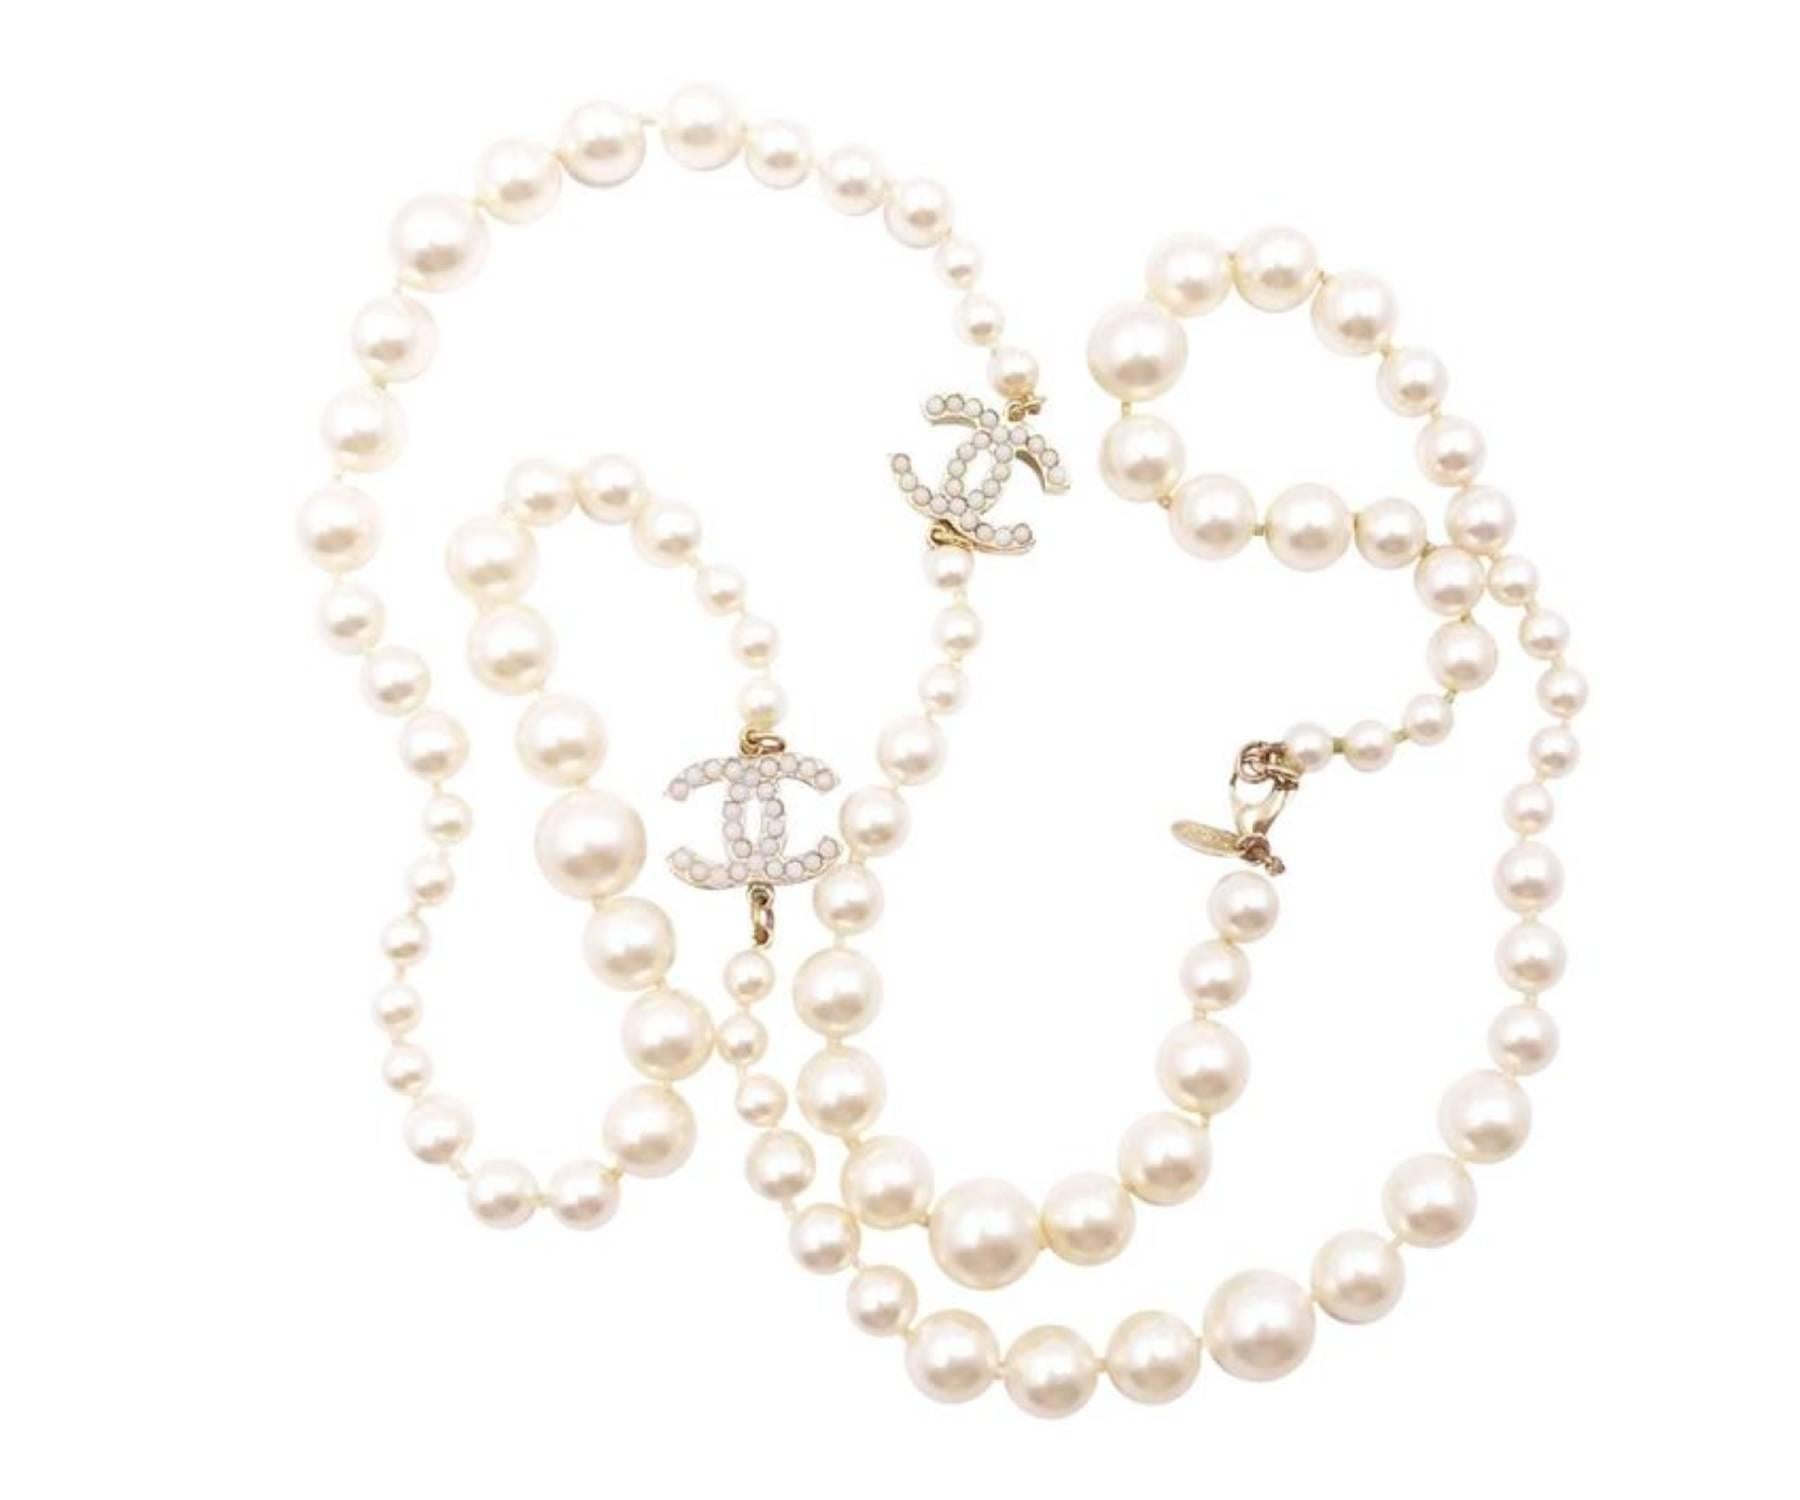 Chanel Classic 2 Gold CC White Bead Pearl Necklace

*Marked 09
*Made in France
*Comes with the original box and dustbag

-It is approximately 34